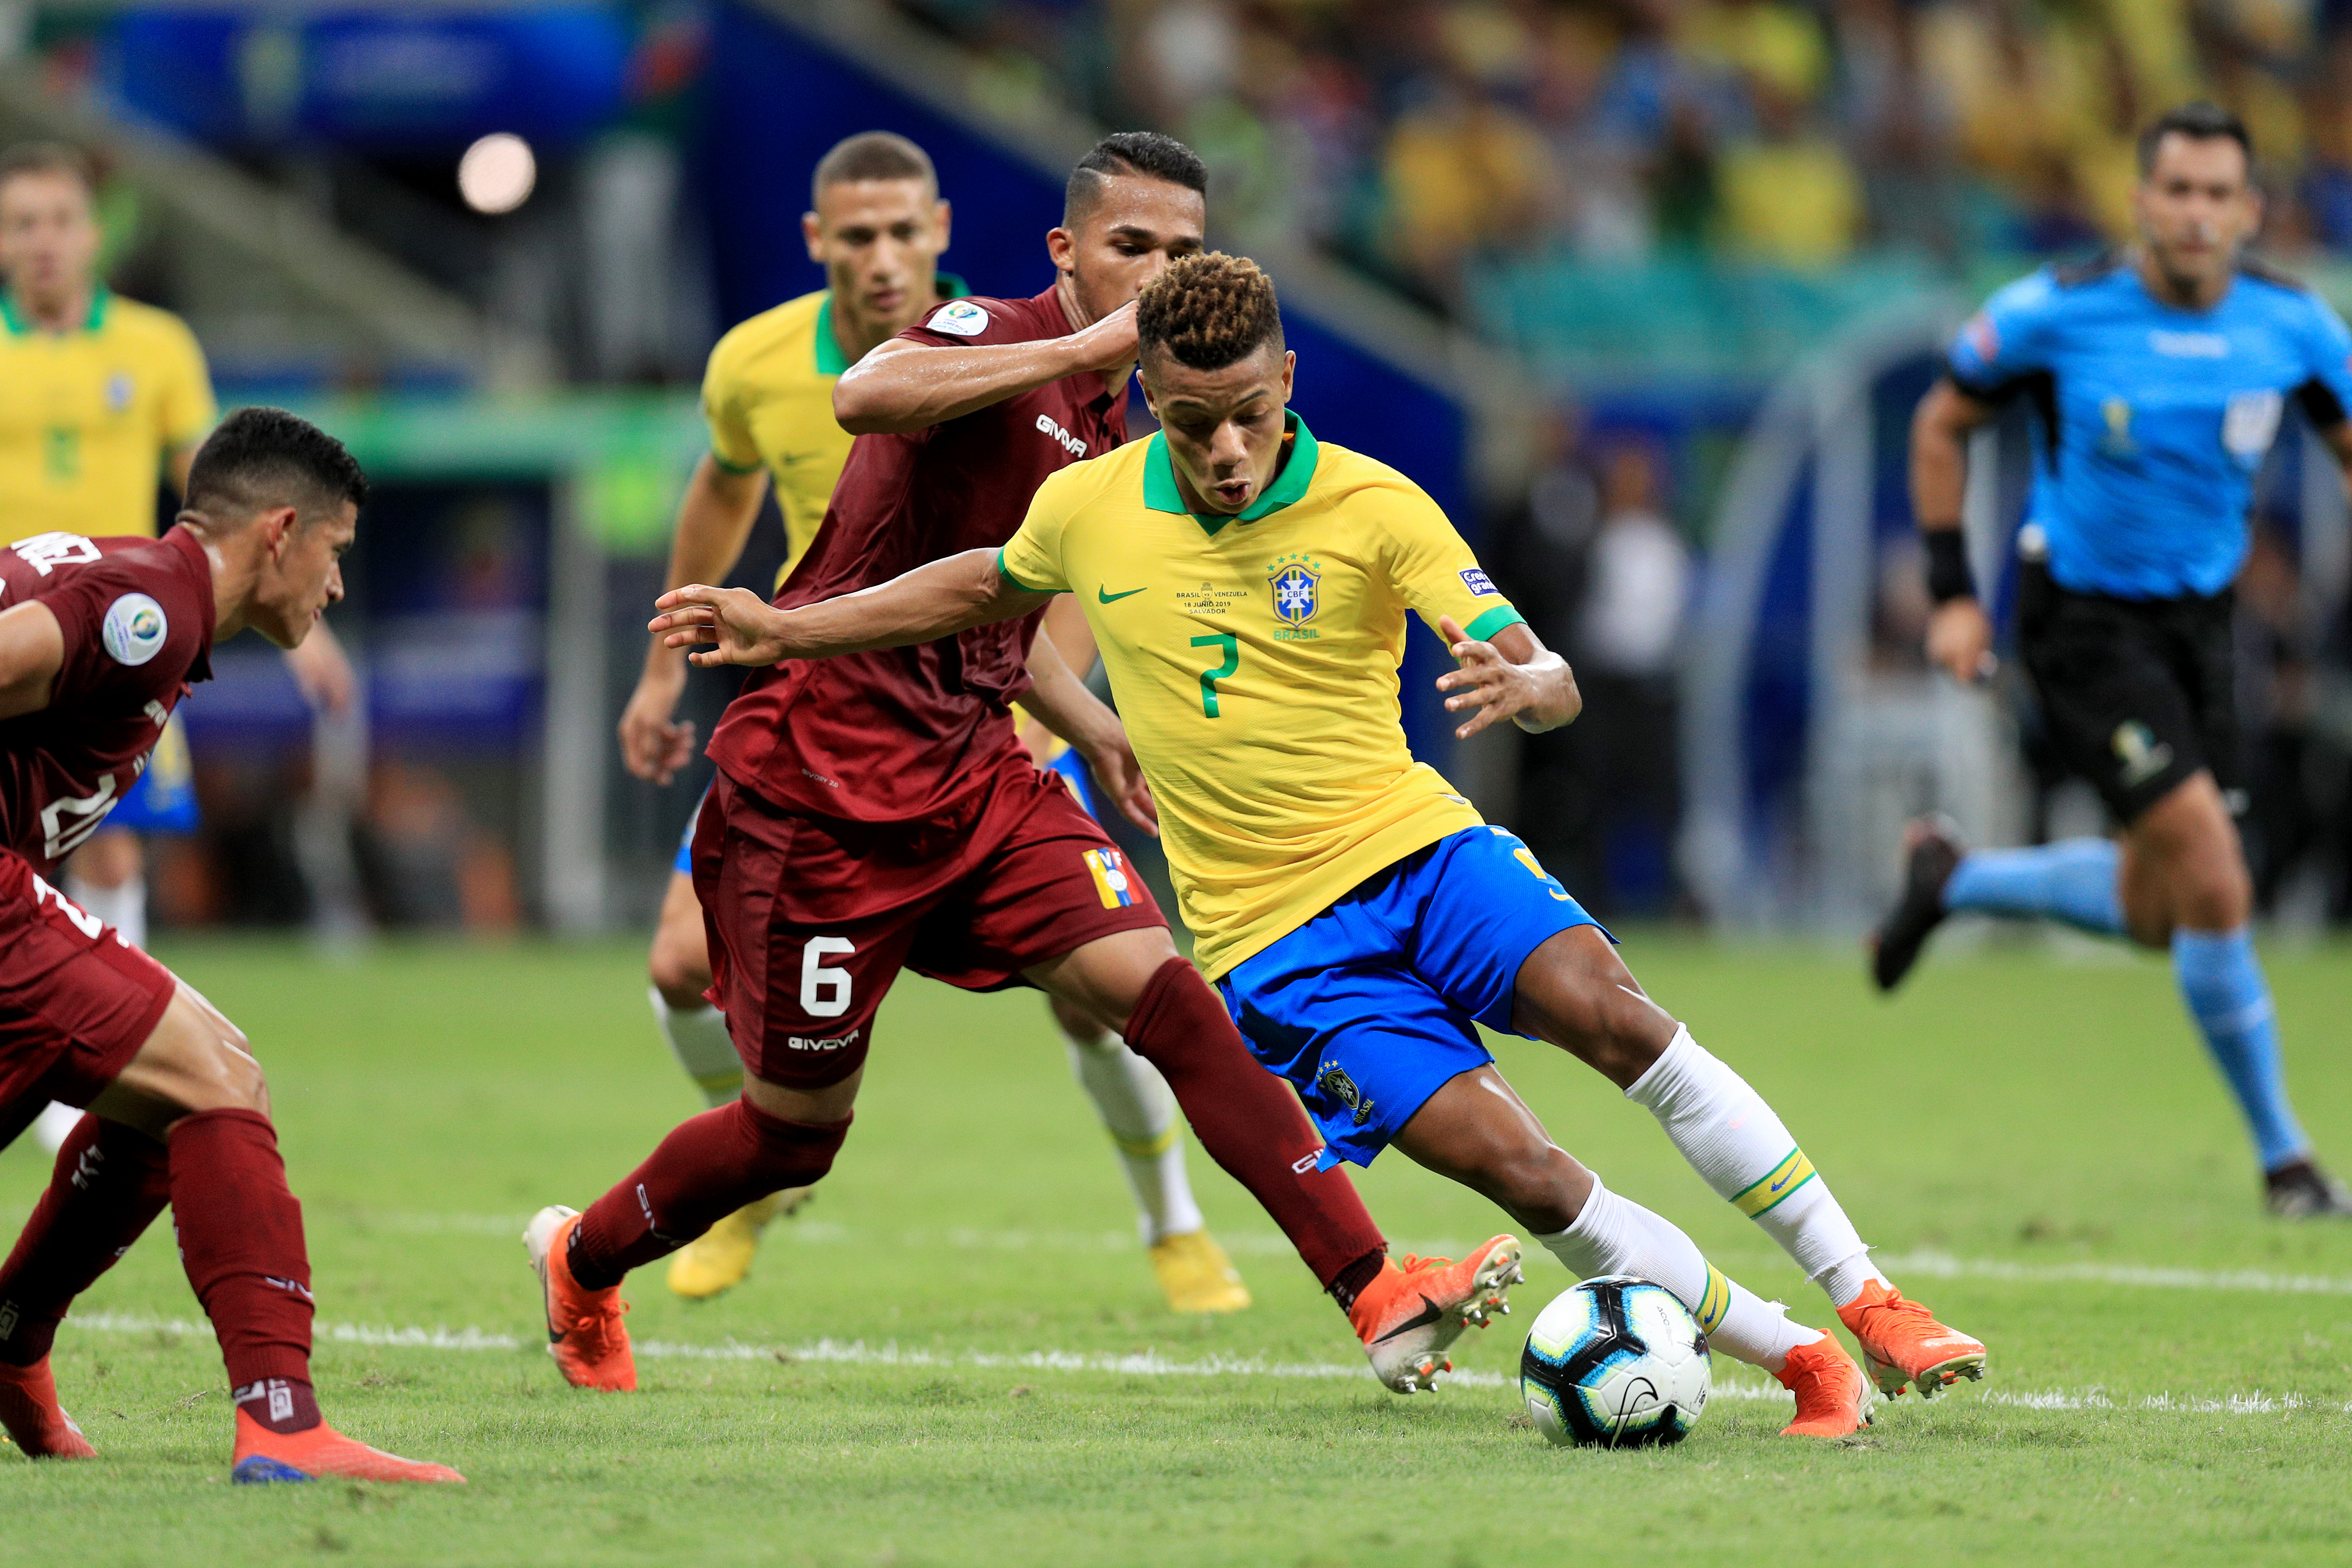 SALVADOR, BRAZIL - JUNE 18: David Neres of Brazil controls the ball against Yangel Herrera of Venezuela during the Copa America Brazil 2019 group A match between Brazil and Venezuela at Arena Fonte Nova on June 18, 2019 in Salvador, Brazil. (Photo by Buda Mendes/Getty Images)